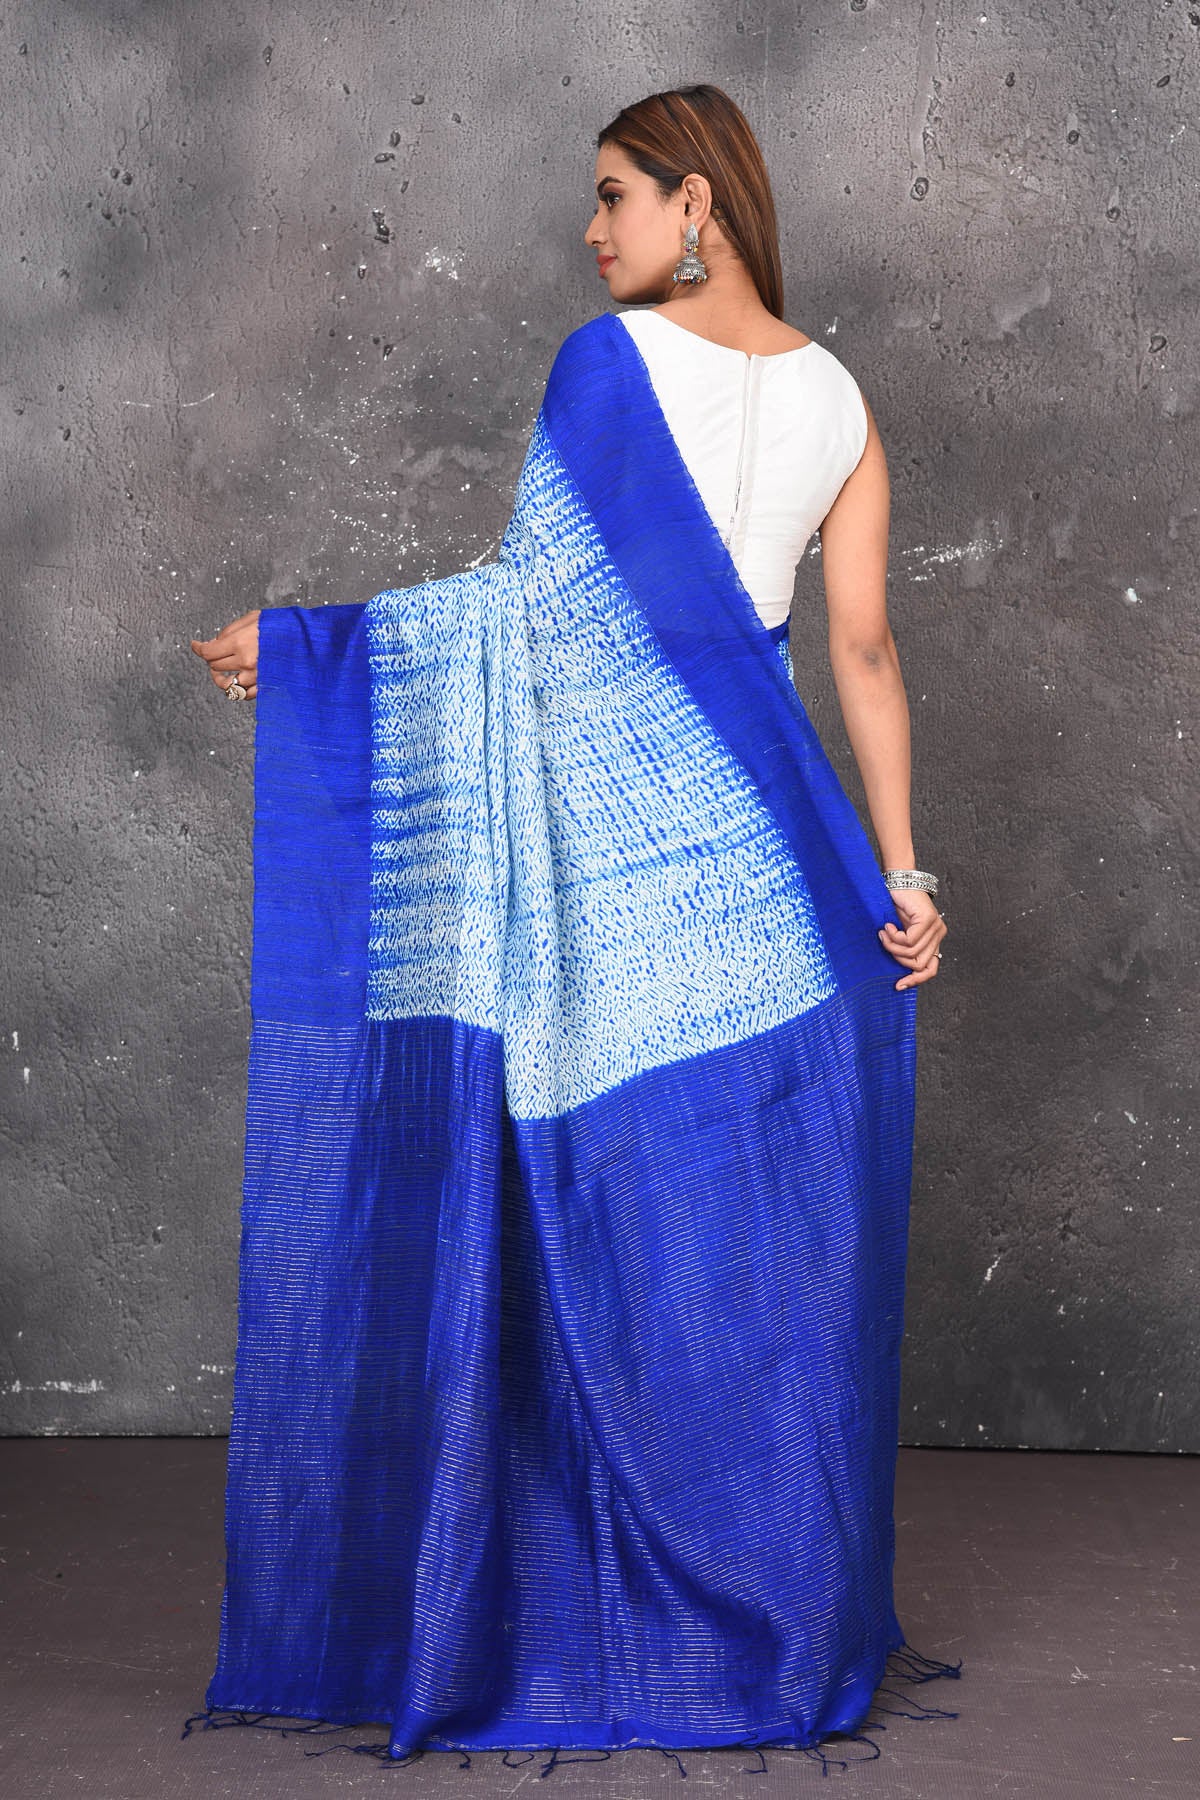 Shop this elegant offwhite-blue handloom shibori tussar saree online in USA which is handcrafted from fine silk tussar fabric, this tie and dye saree brings out the nature of flow. You can pair this beautiful shibori print with minimal jewellery for a casual day outfit. Add this plain shibori saree to your collection from Pure Elegance Indian fashion store in USA.-Back view with open pallu.